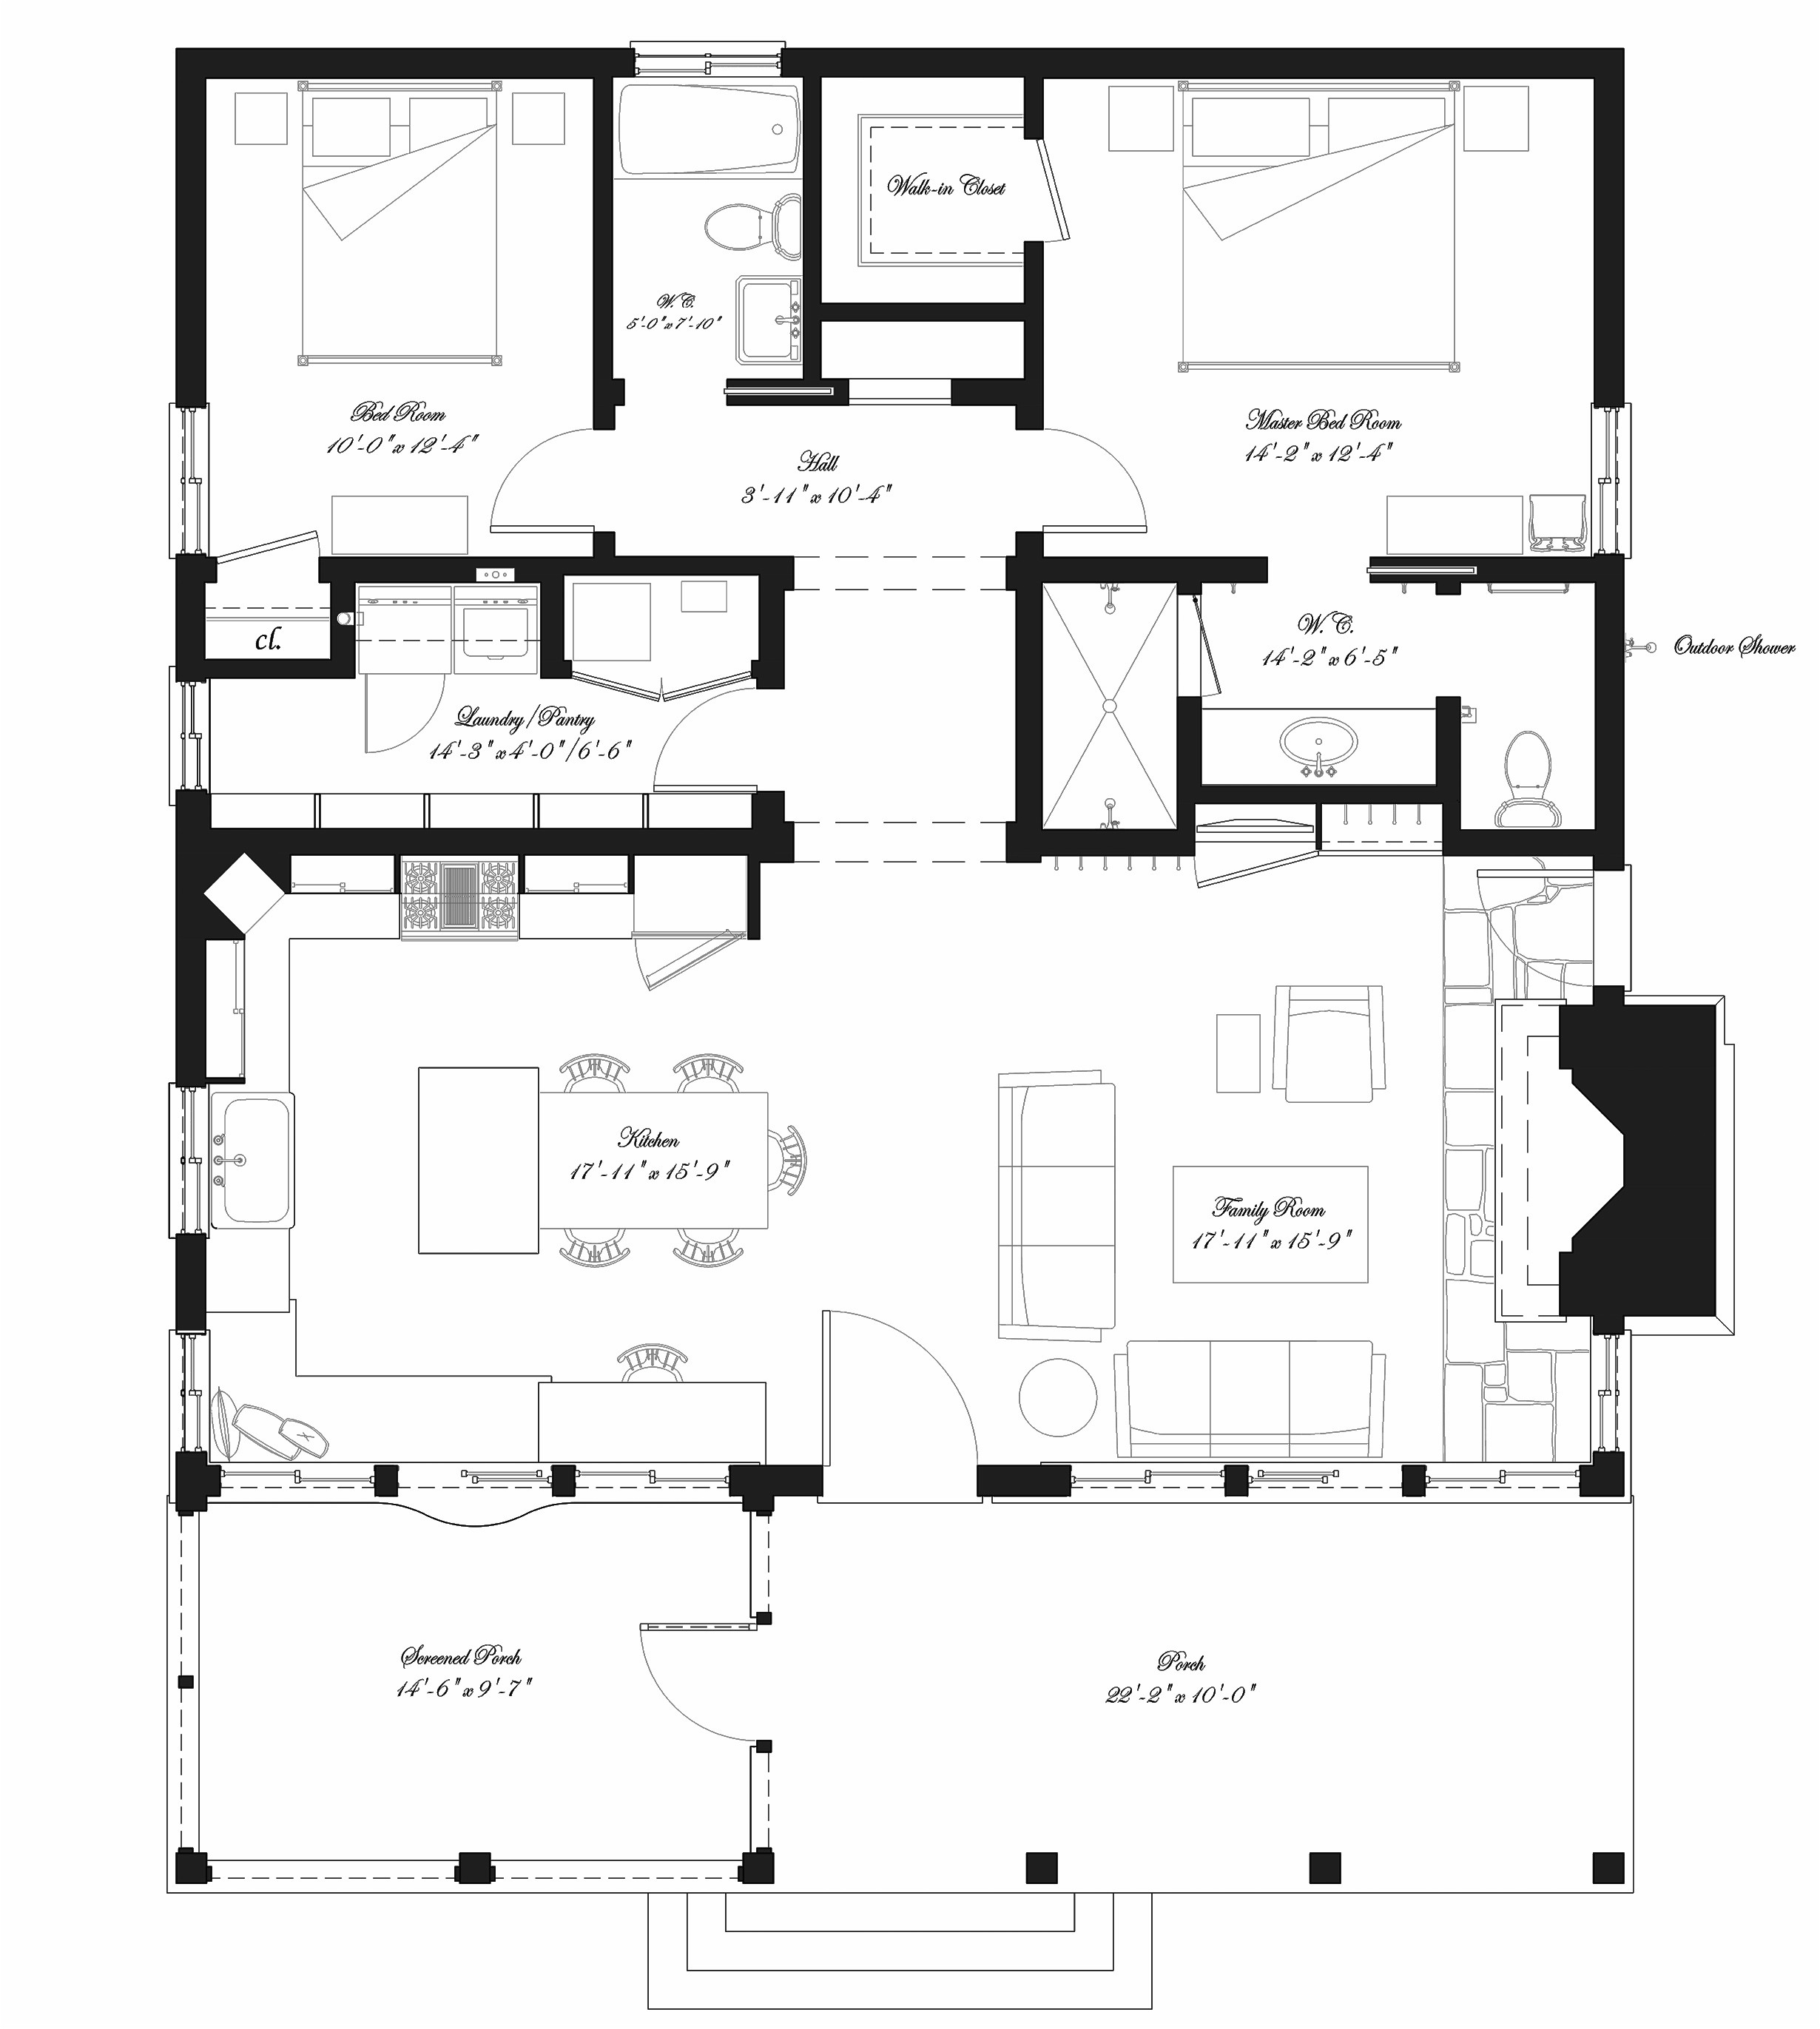 Small Duplex House Plans 400 Sq Ft Guest House Plans 400 Square Feet